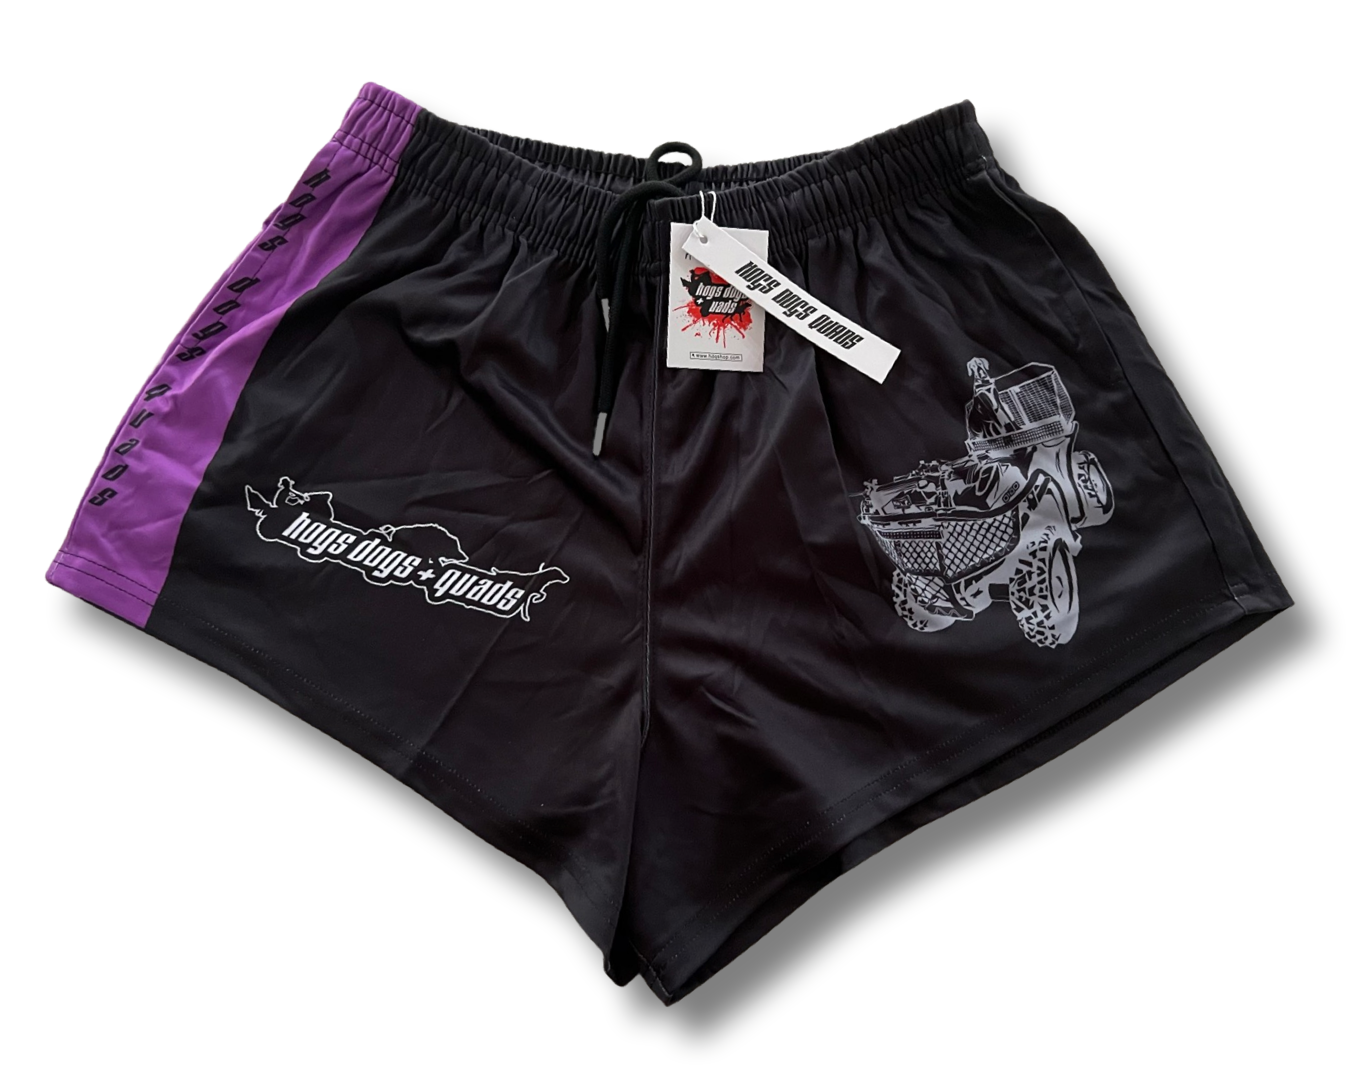 🔥NEW🔥 Quad & Hound Footy Shorts - WITH POCKETS - Hogs Dogs Quads Shop